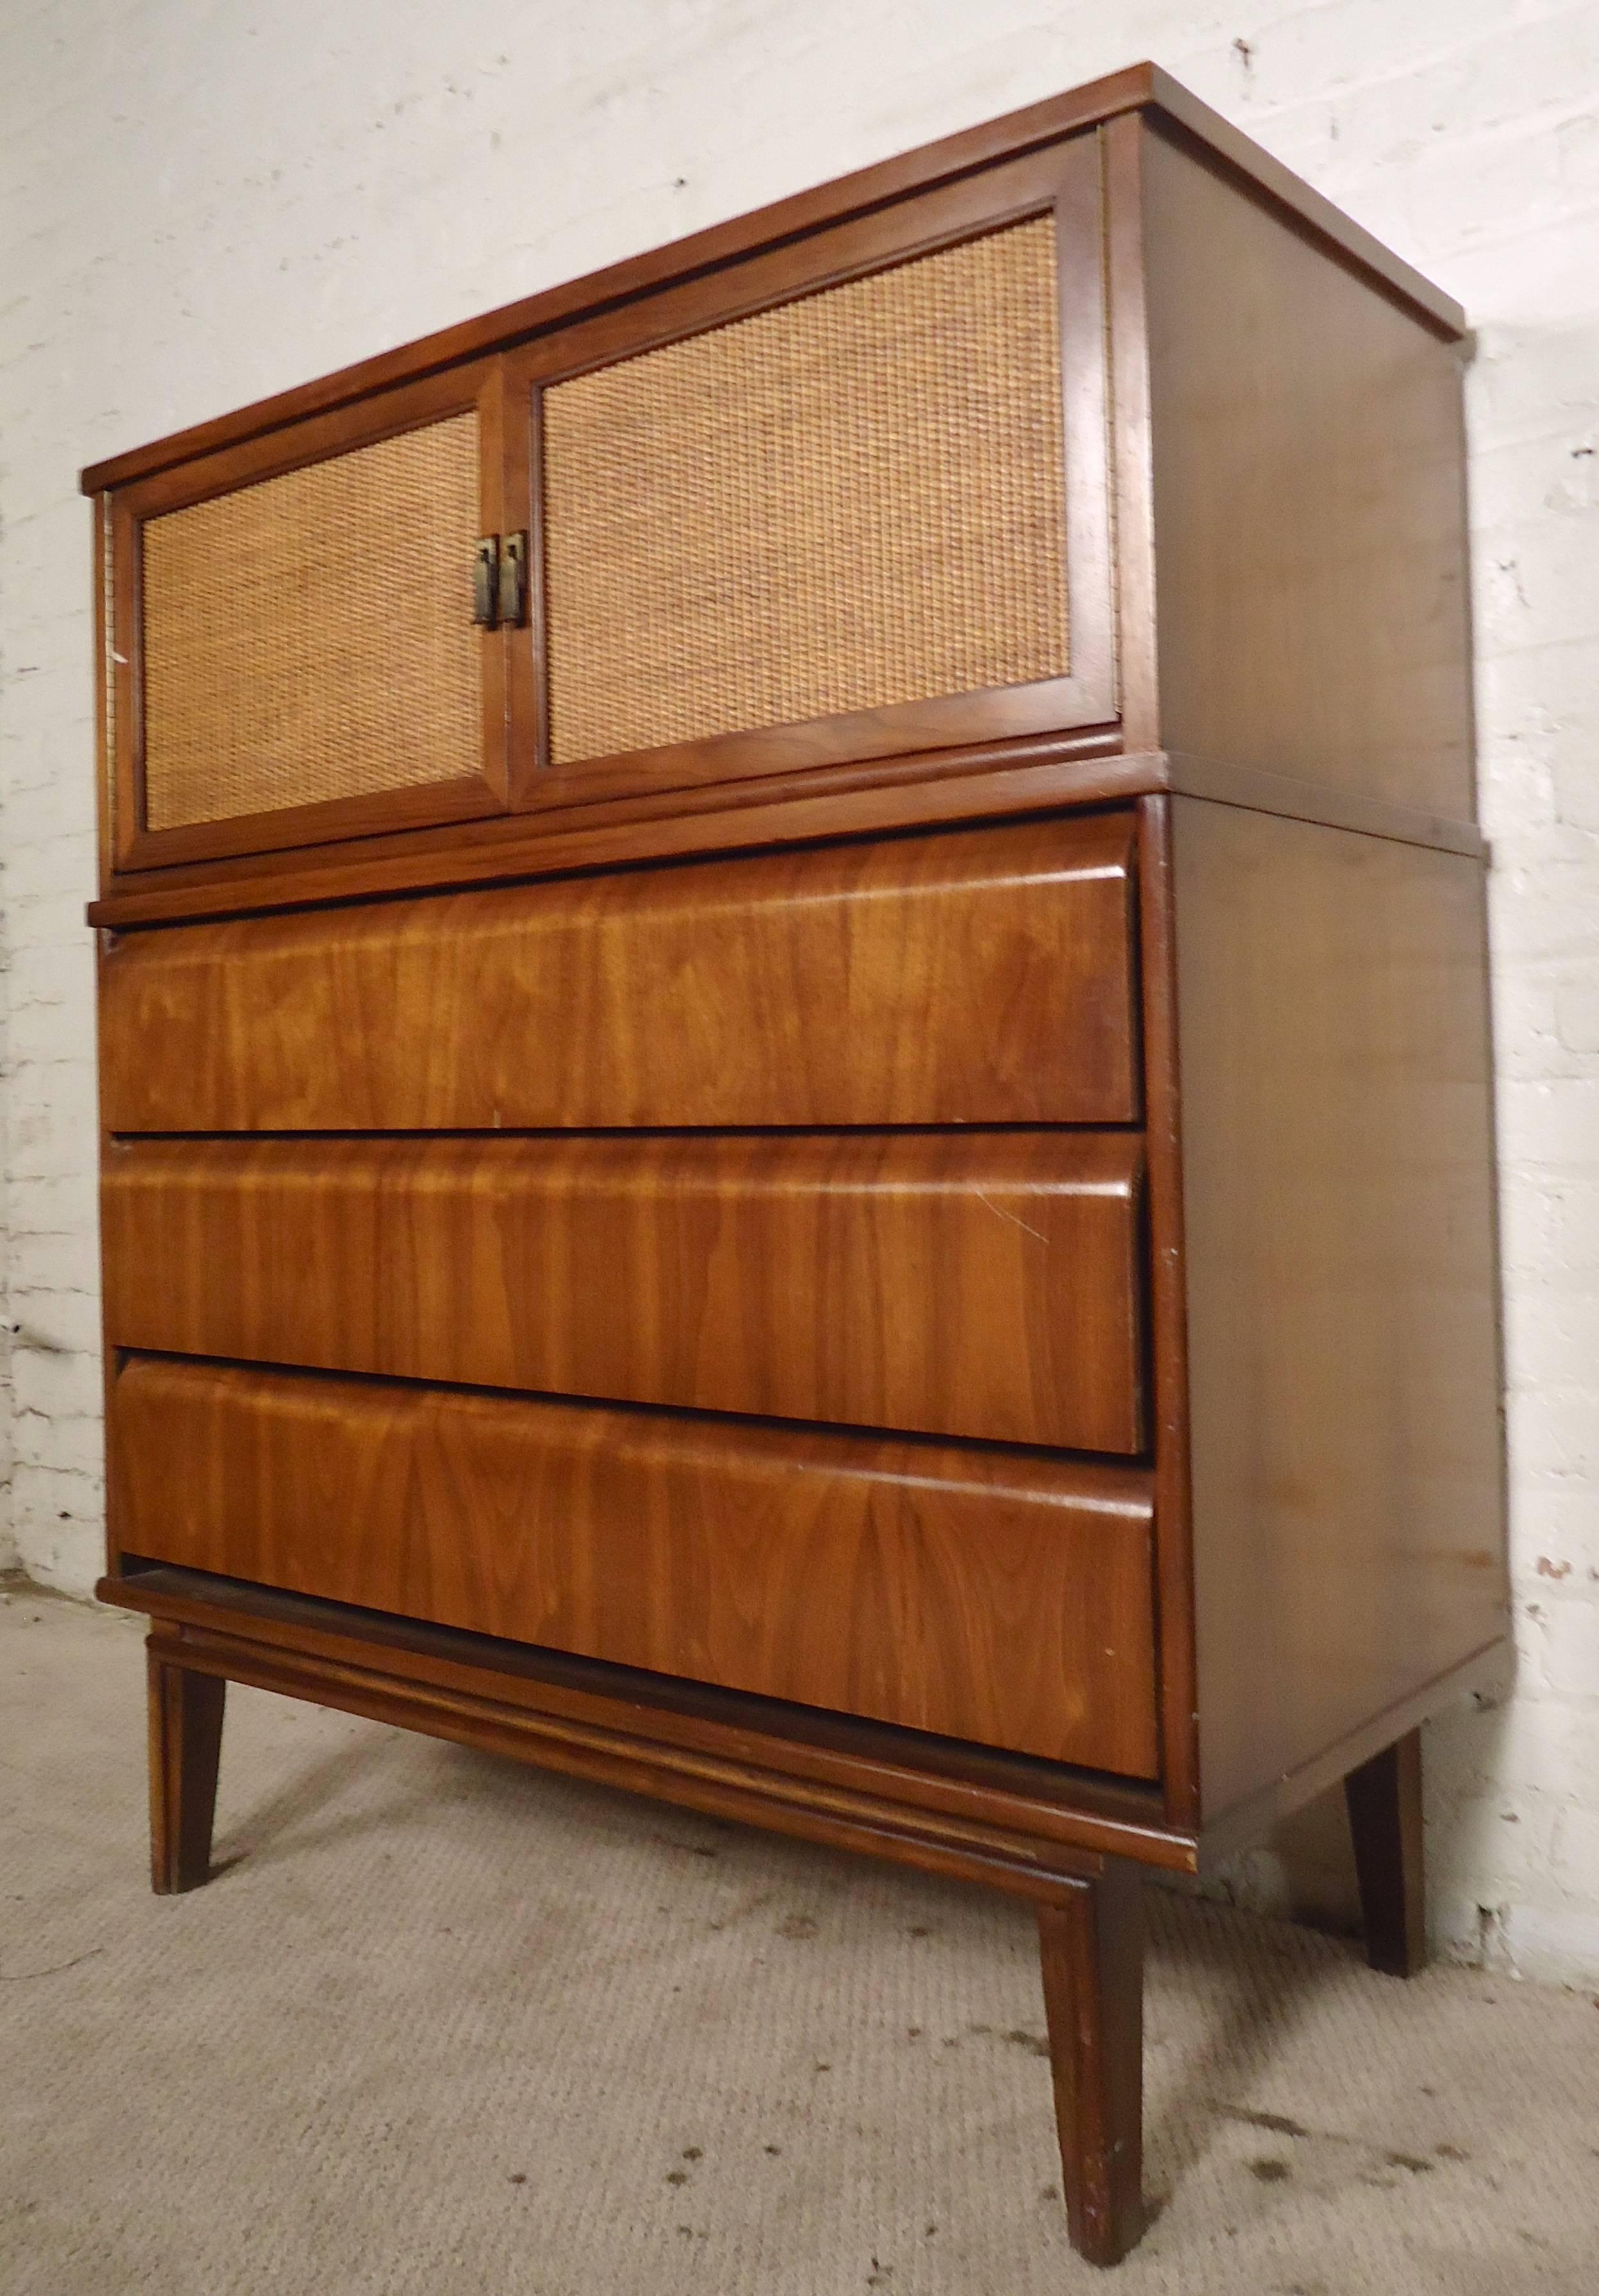 Mid-century modern chest of drawers with cane doors and curved drawers. Five total drawers, three with unusual formed tops and two set inside cane doors. Warm walnut grain throughout with brass pulls.

(Please confirm item location - NY or NJ -